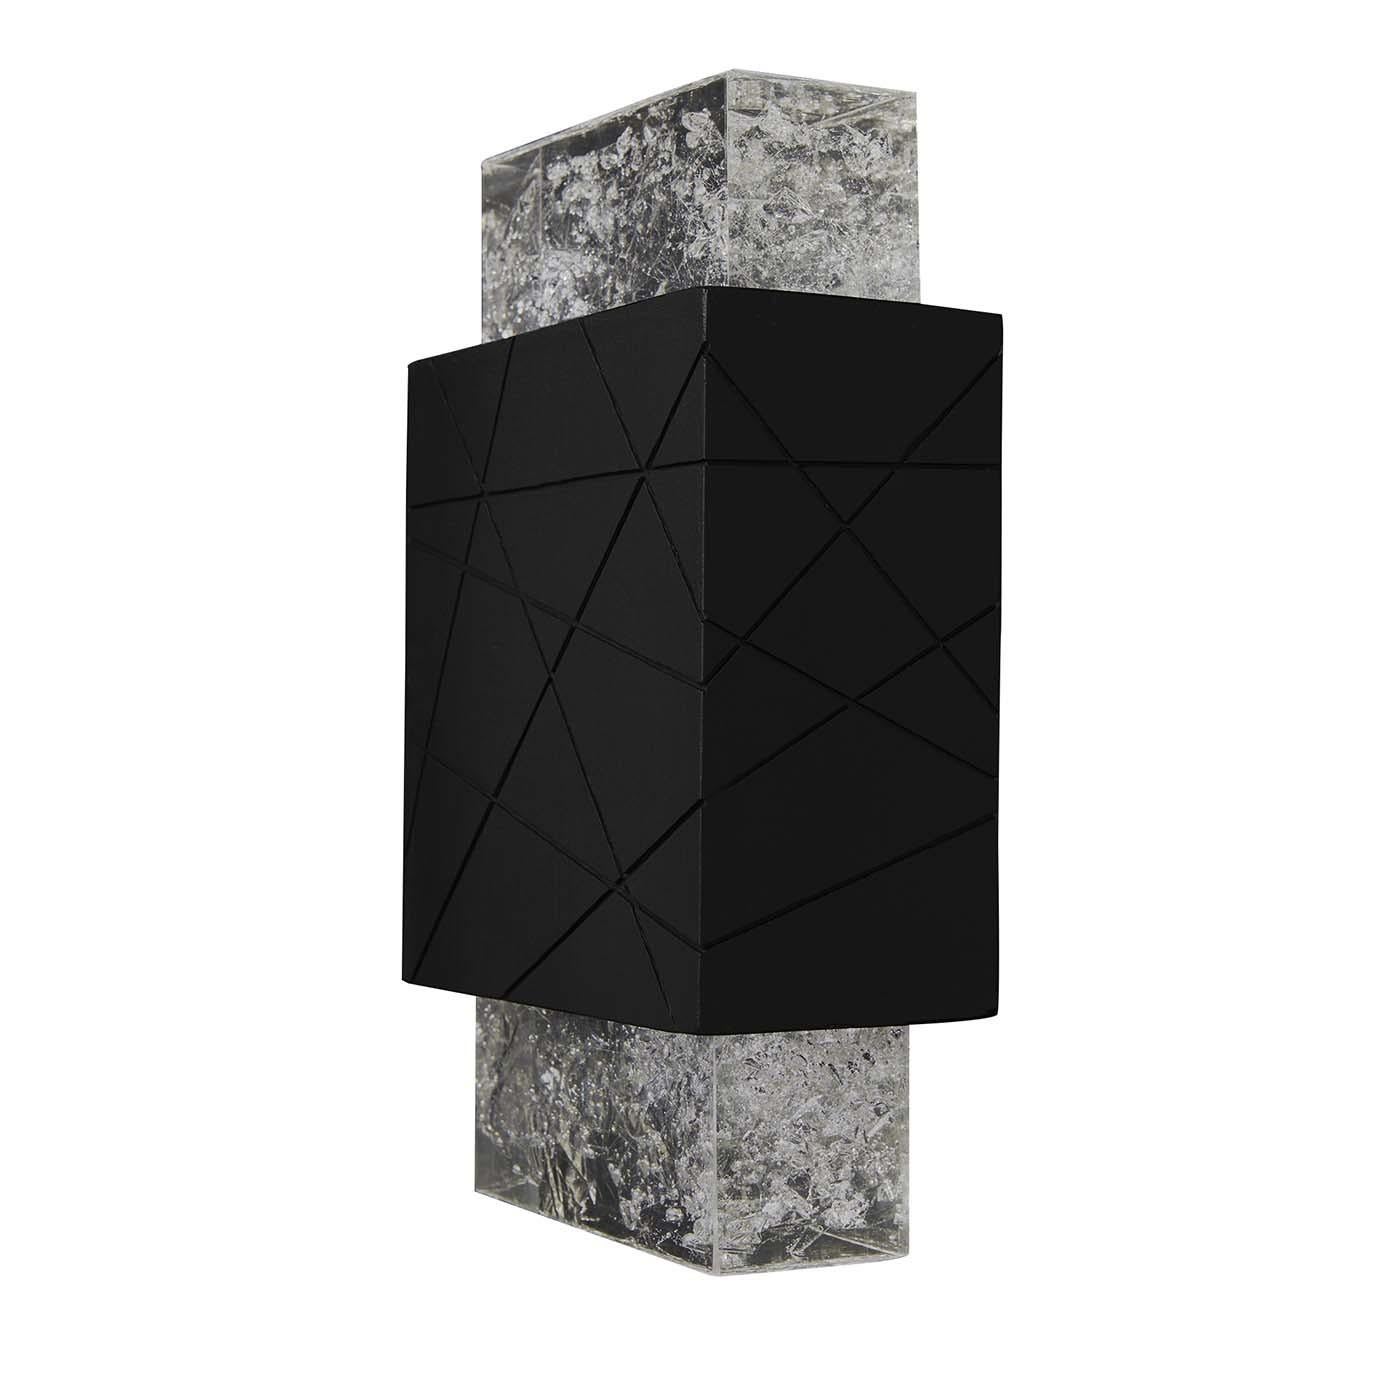 Light, architectural space and natural materials are the main elements of this wall lamp that merges geometric volumes and transparency in a stern yet stylish design. Handcrafted of black volcanic rock, the central body is engraved with irregular